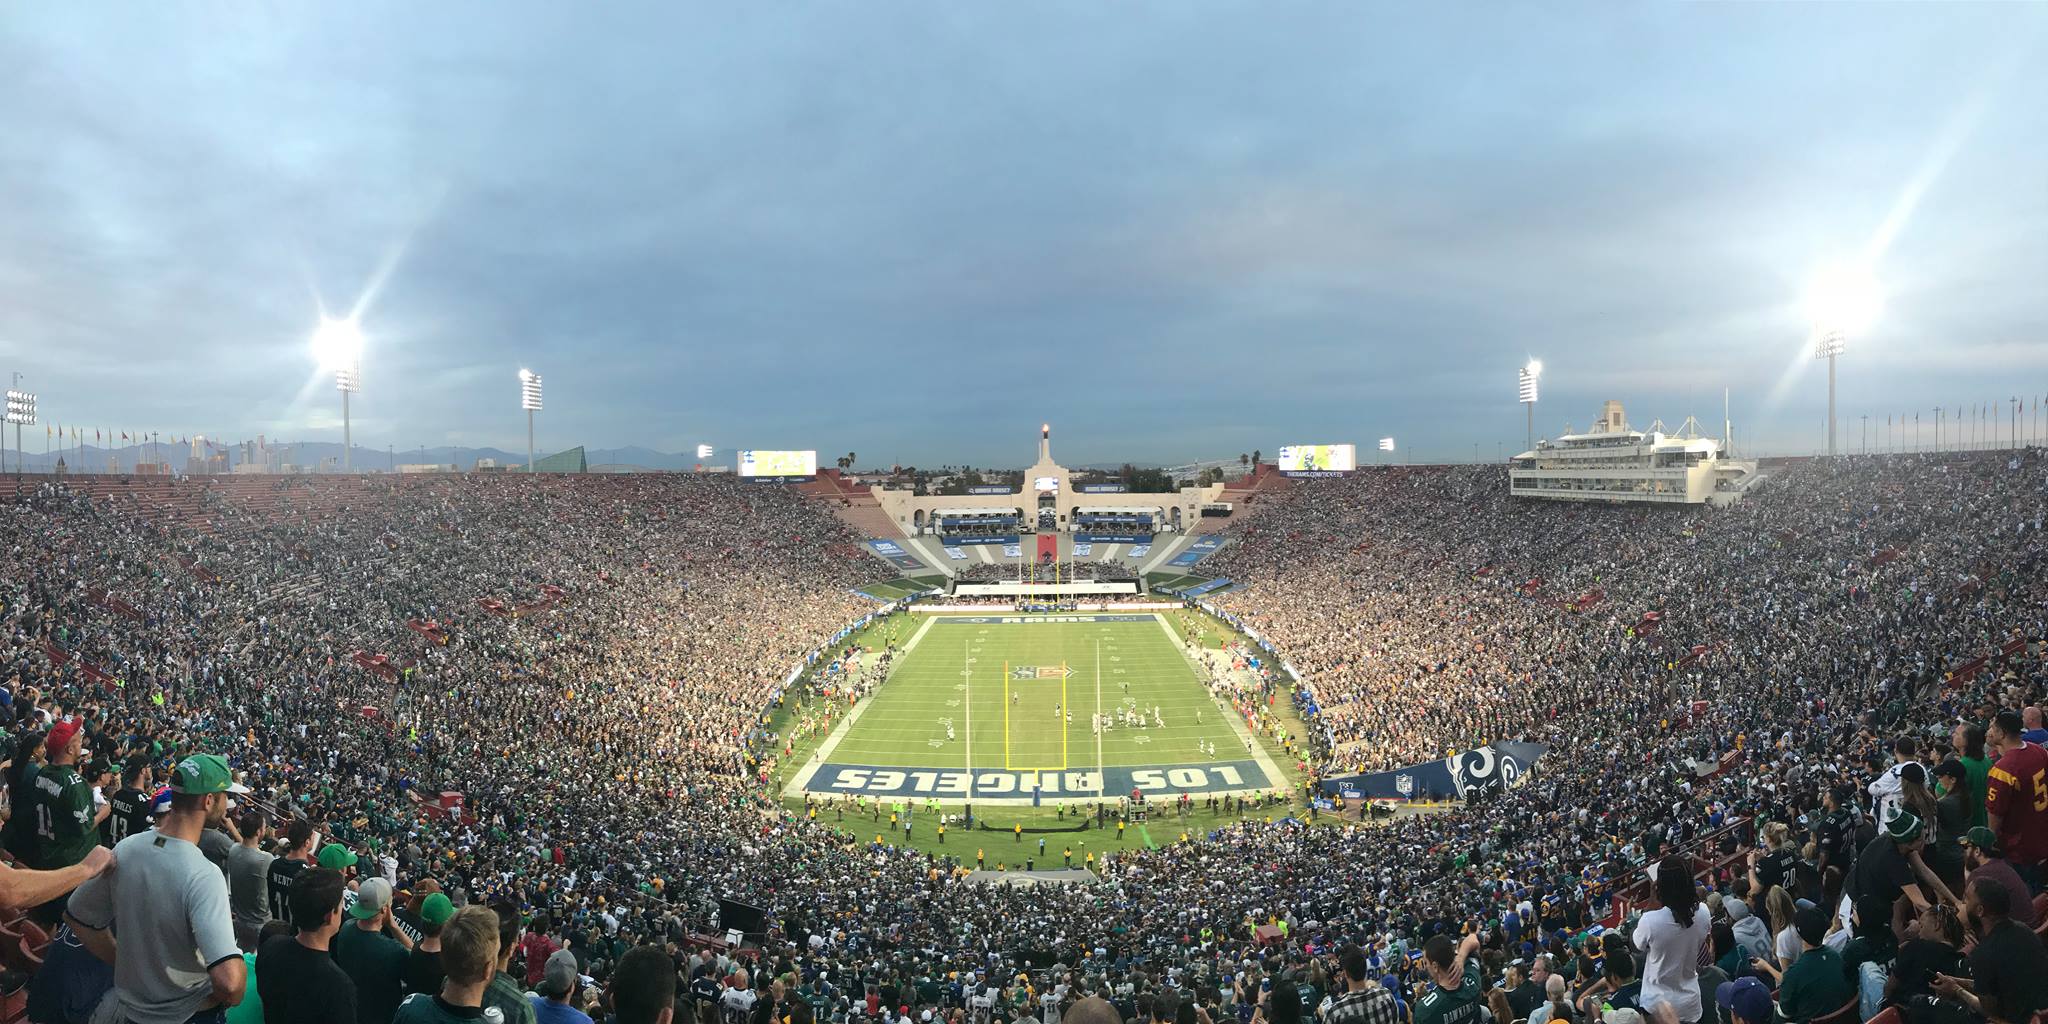 NFL Playoffs Promise Strong Slate of Stadiums - Football Stadium Digest